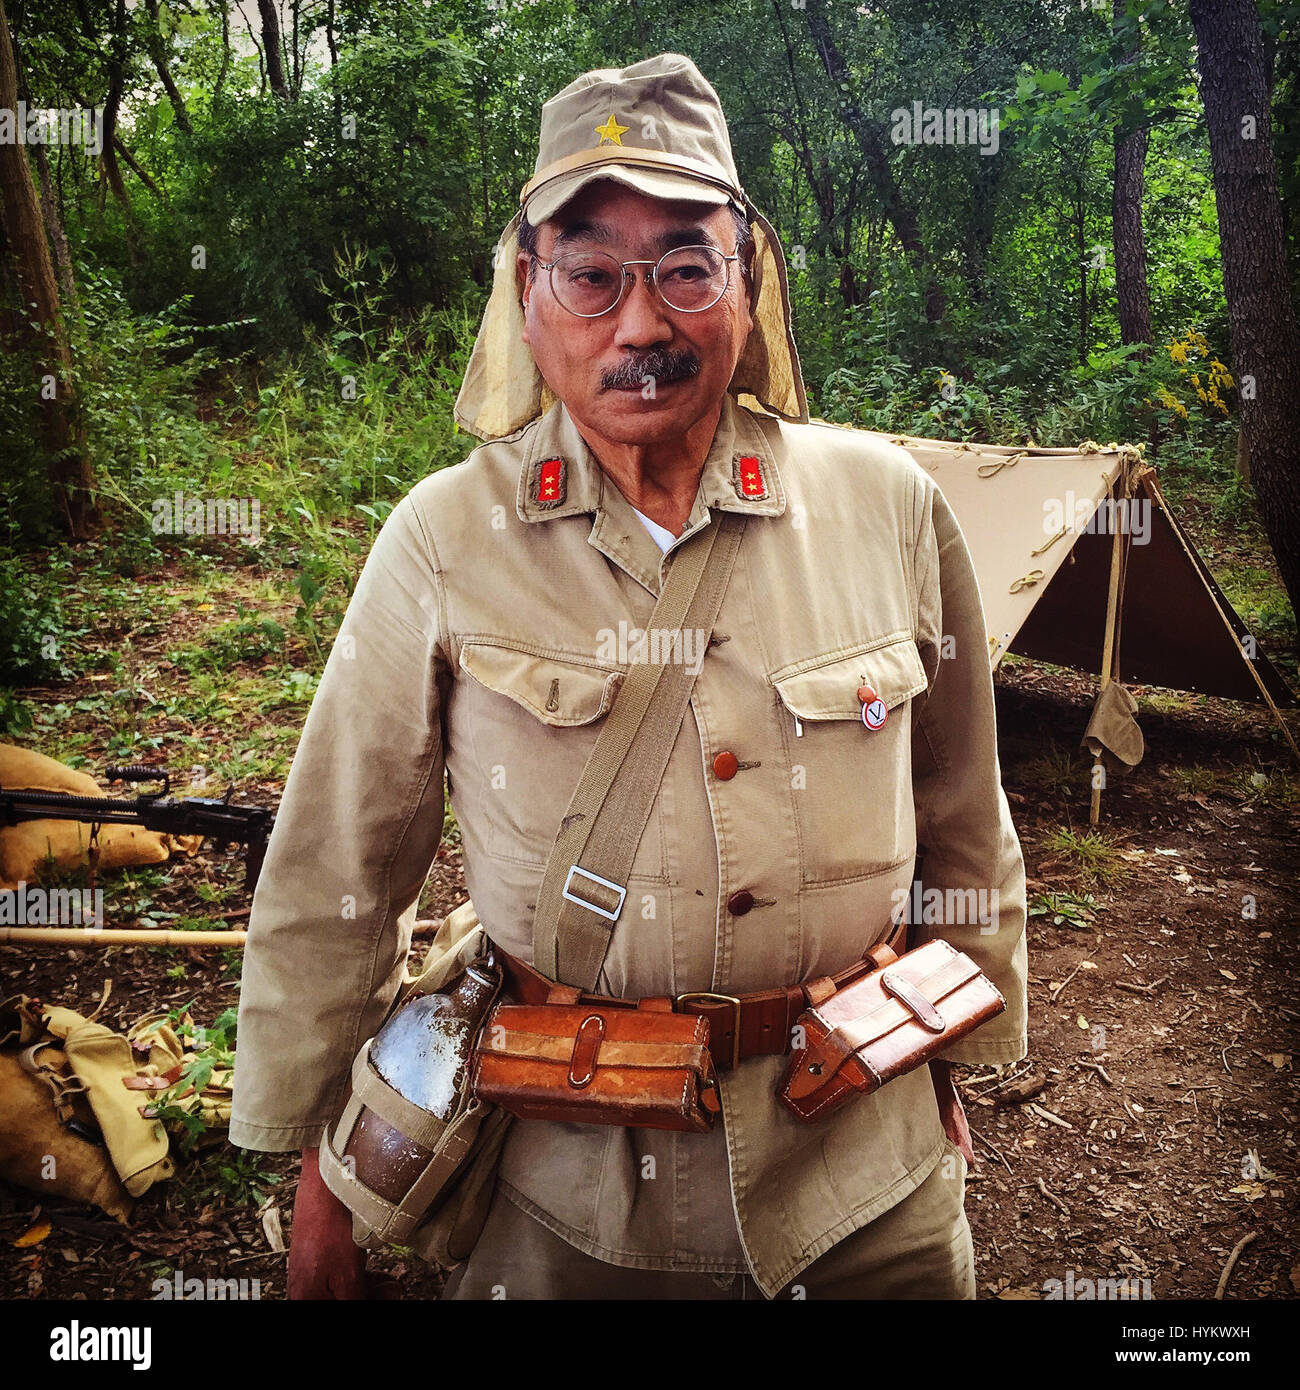 First Class Private in Imperial Japanese Army @ 2015 WWII Days – Lockport, IL. A WW2 OBSESSIVE has spent more than £30,000 to travel 64,000 miles around the world on a mission to document the quirky world of war re-enactment. The eye-popping snaps show WW2 fans in a variety of authentic uniforms from the era including Nazi Luftwaffe officers, RAF pilots and American paratroopers.  Other images show the real life war veterans who attend these events including a US Marine who witnessed the famous flag raising at Iwo Jima and a Polish holocaust survivor. The pictures were taken by American advert Stock Photo